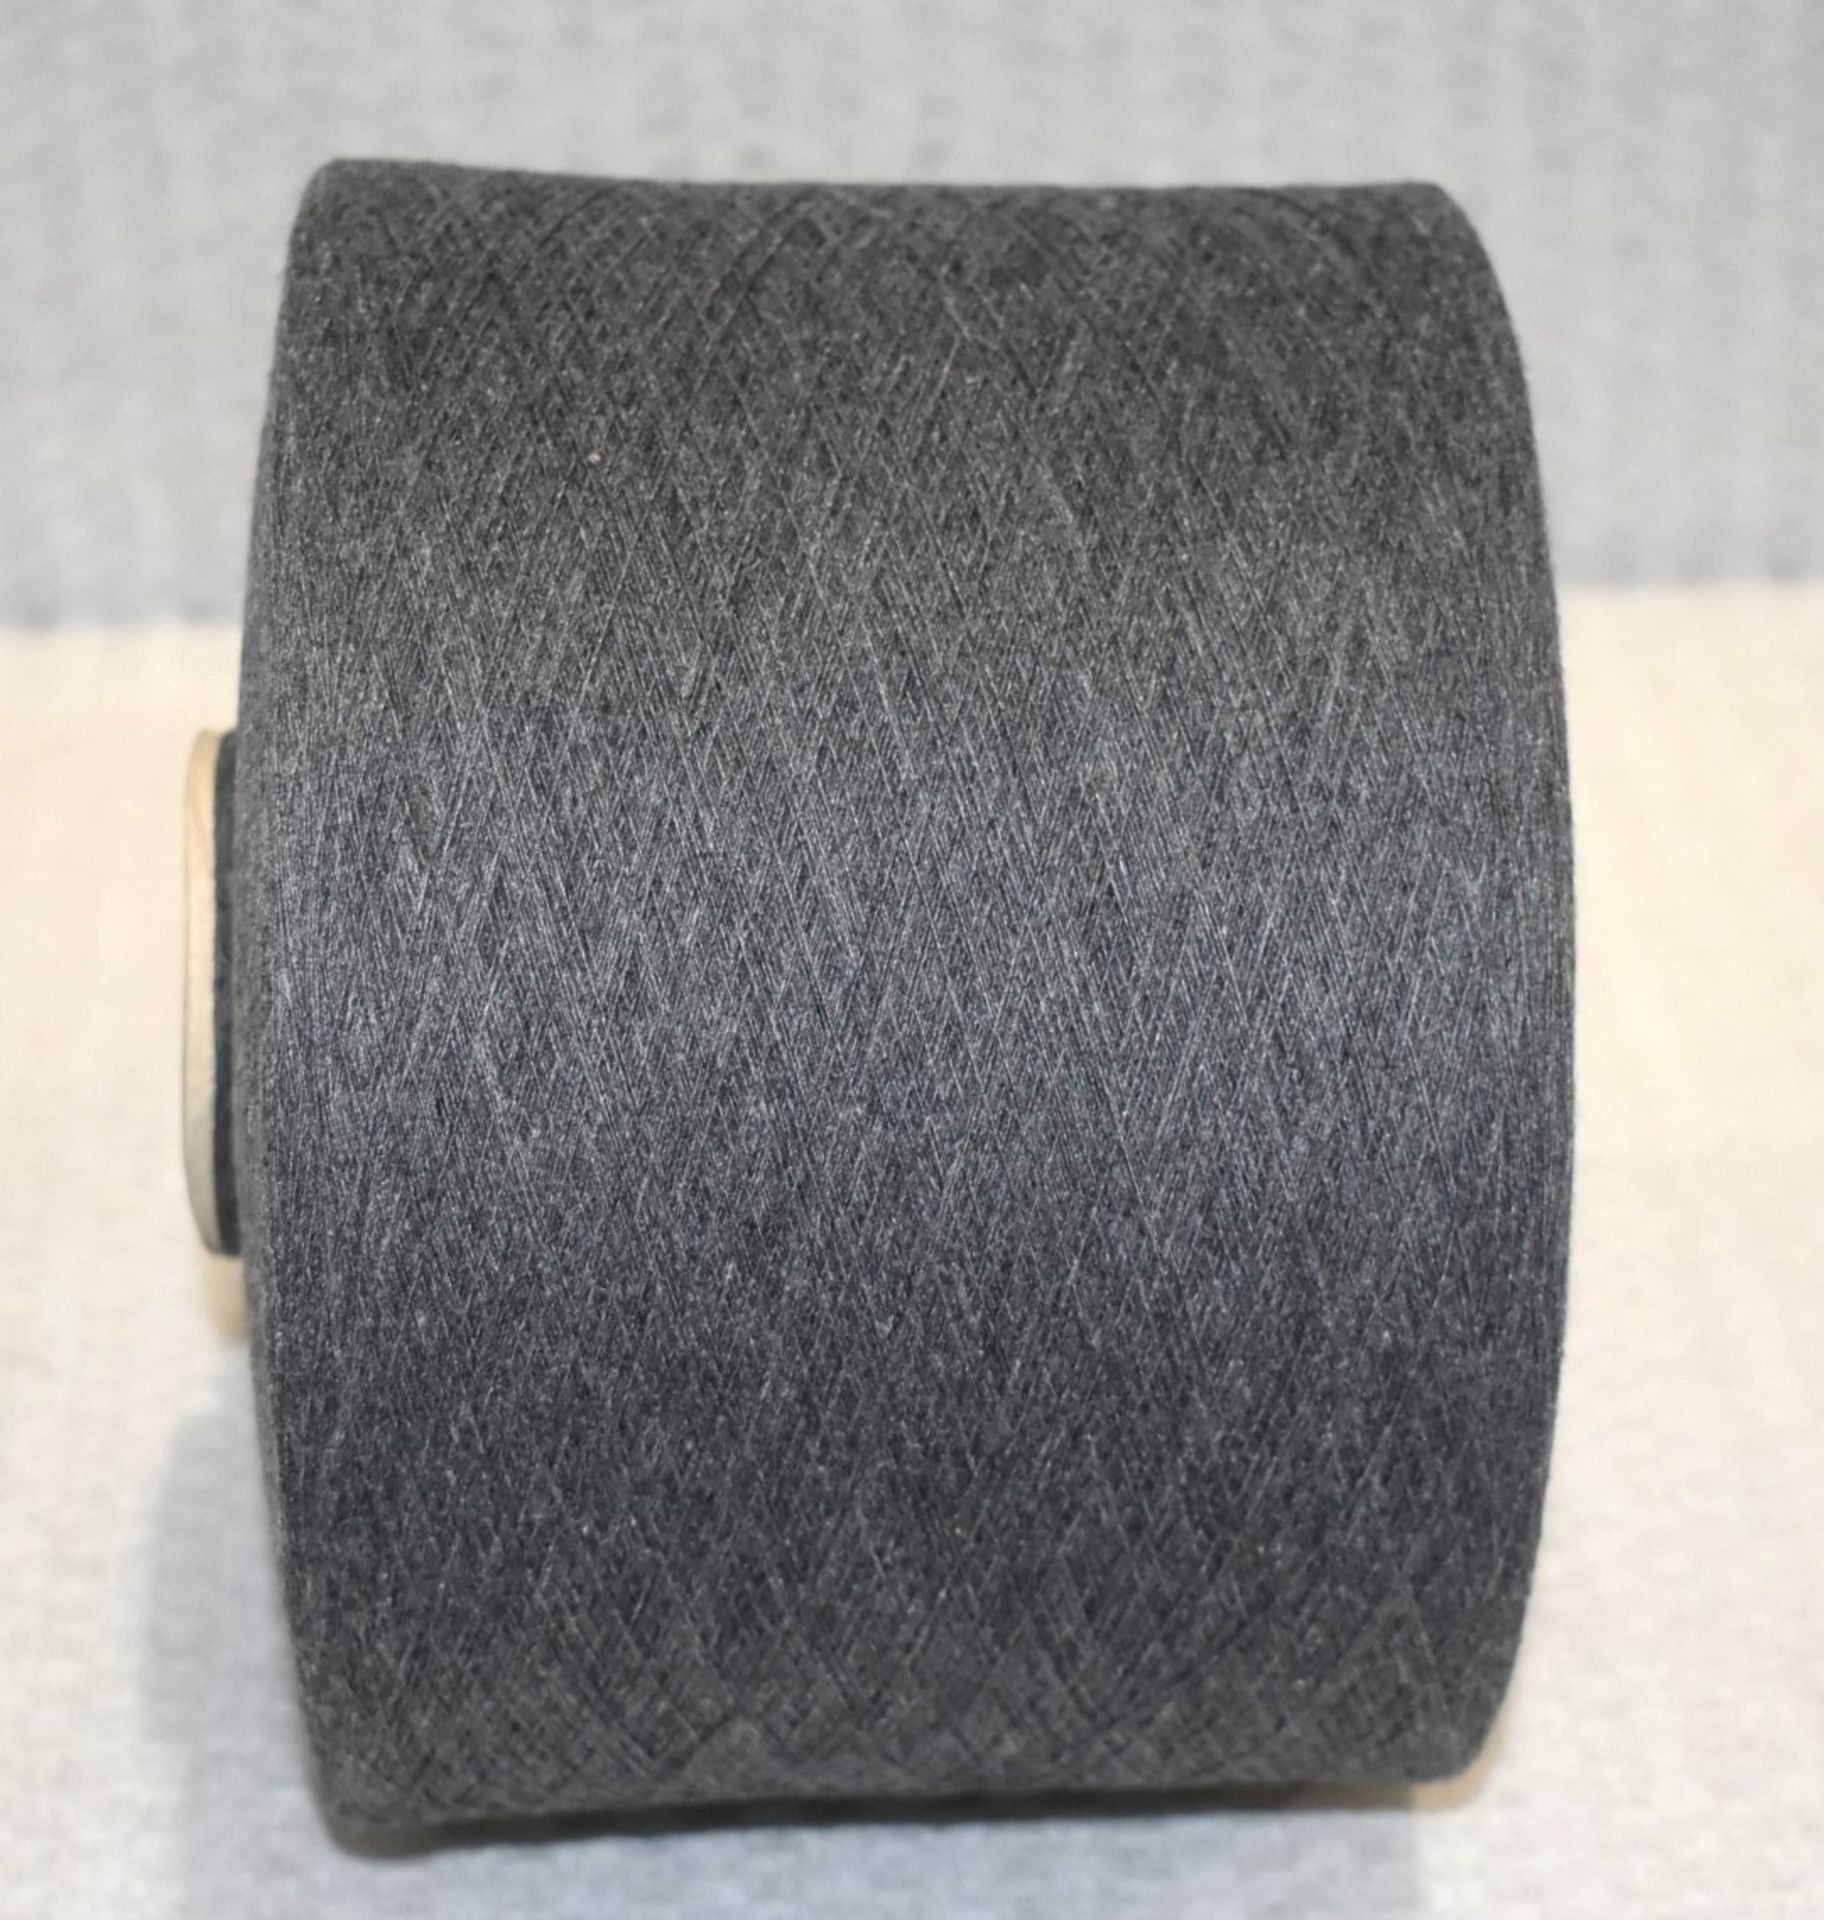 4 x Cones of 1/13 MicroCotton Knitting Yarn - Mid Grey - Approx Weight: 2,500g - New Stock ABL Yarn - Image 9 of 10